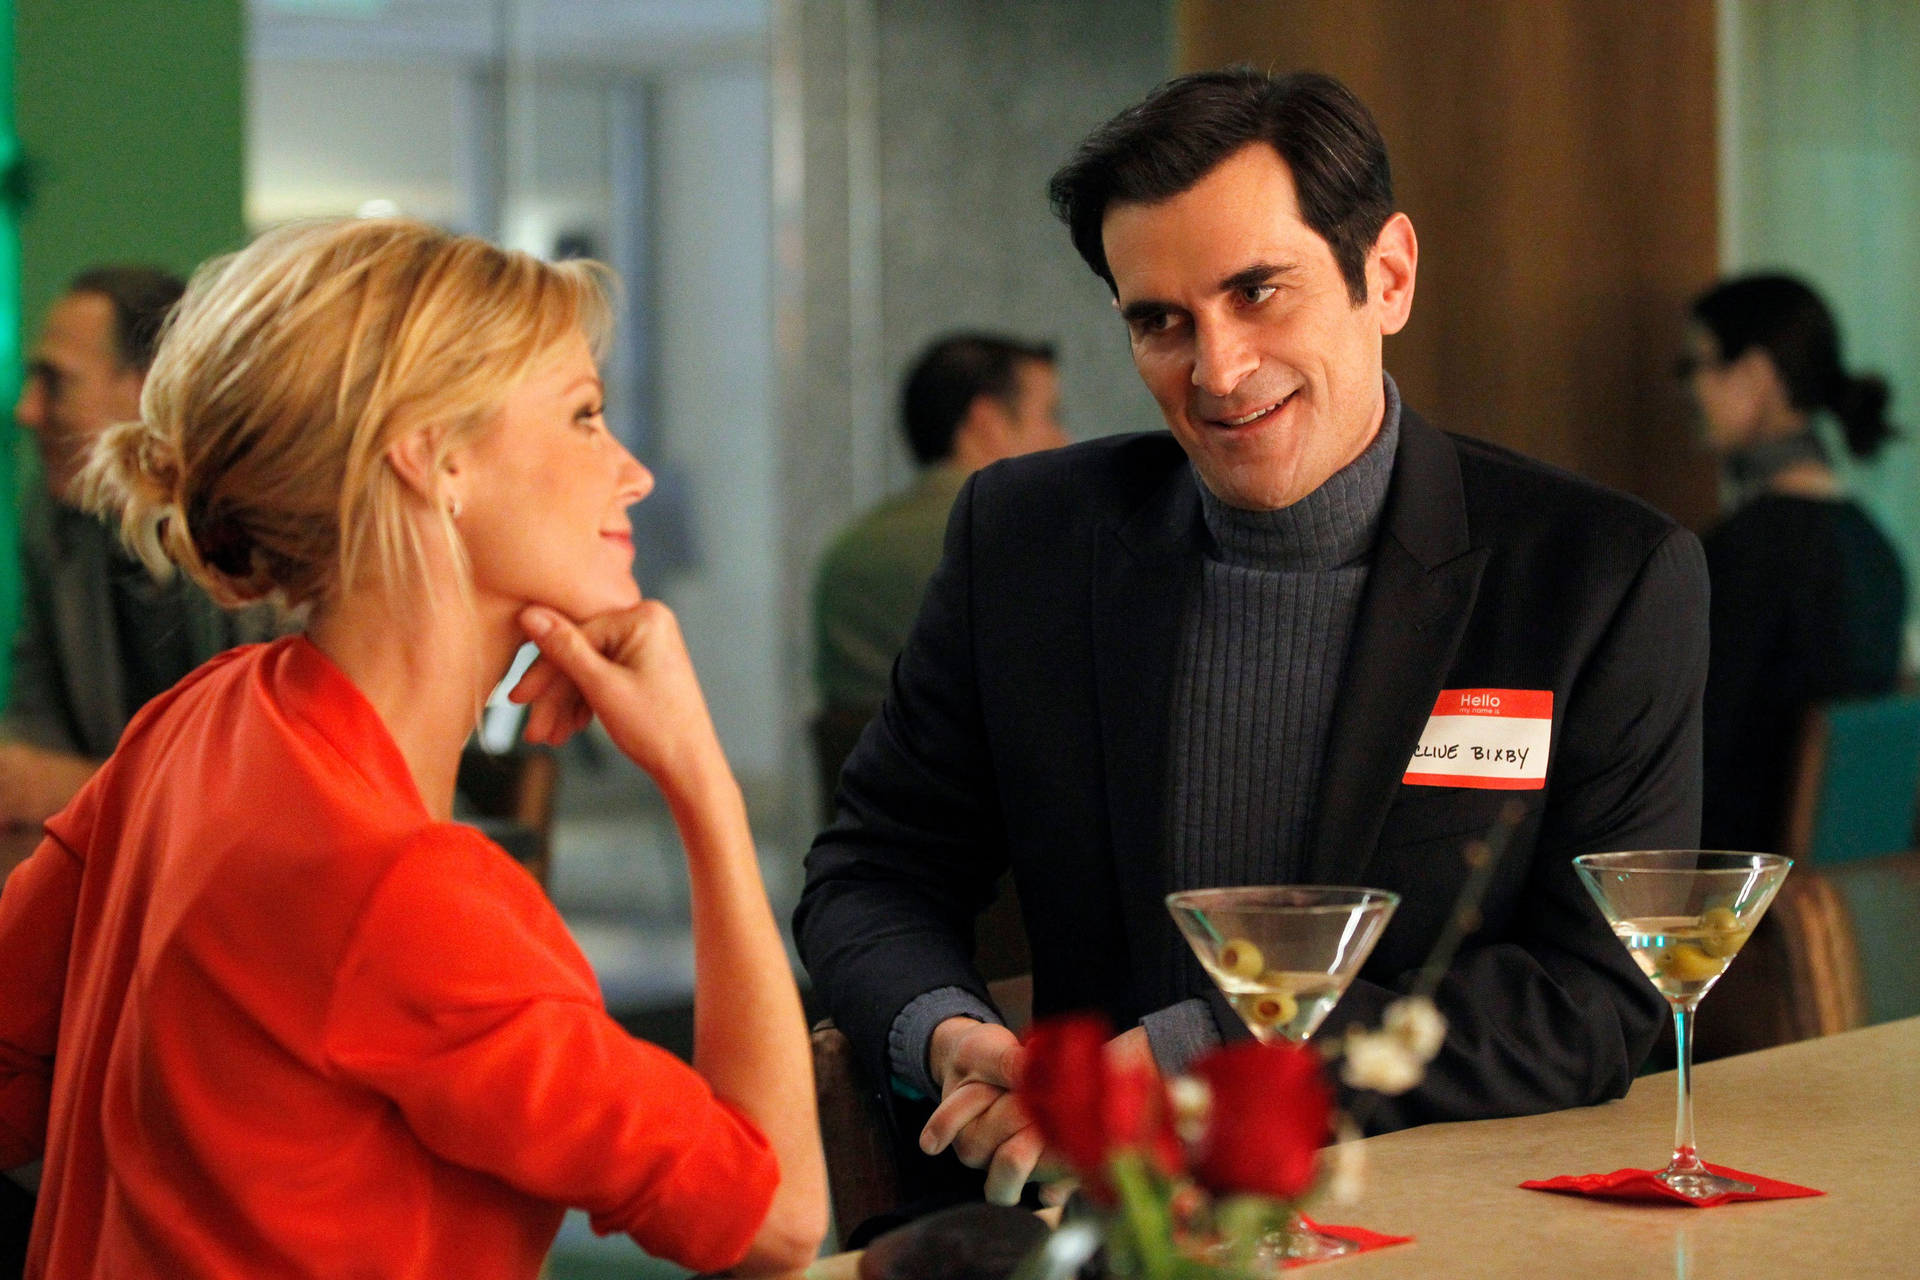 Meet Clive Bixby And Julianna, One Of Modern Family's Funniest Couplings